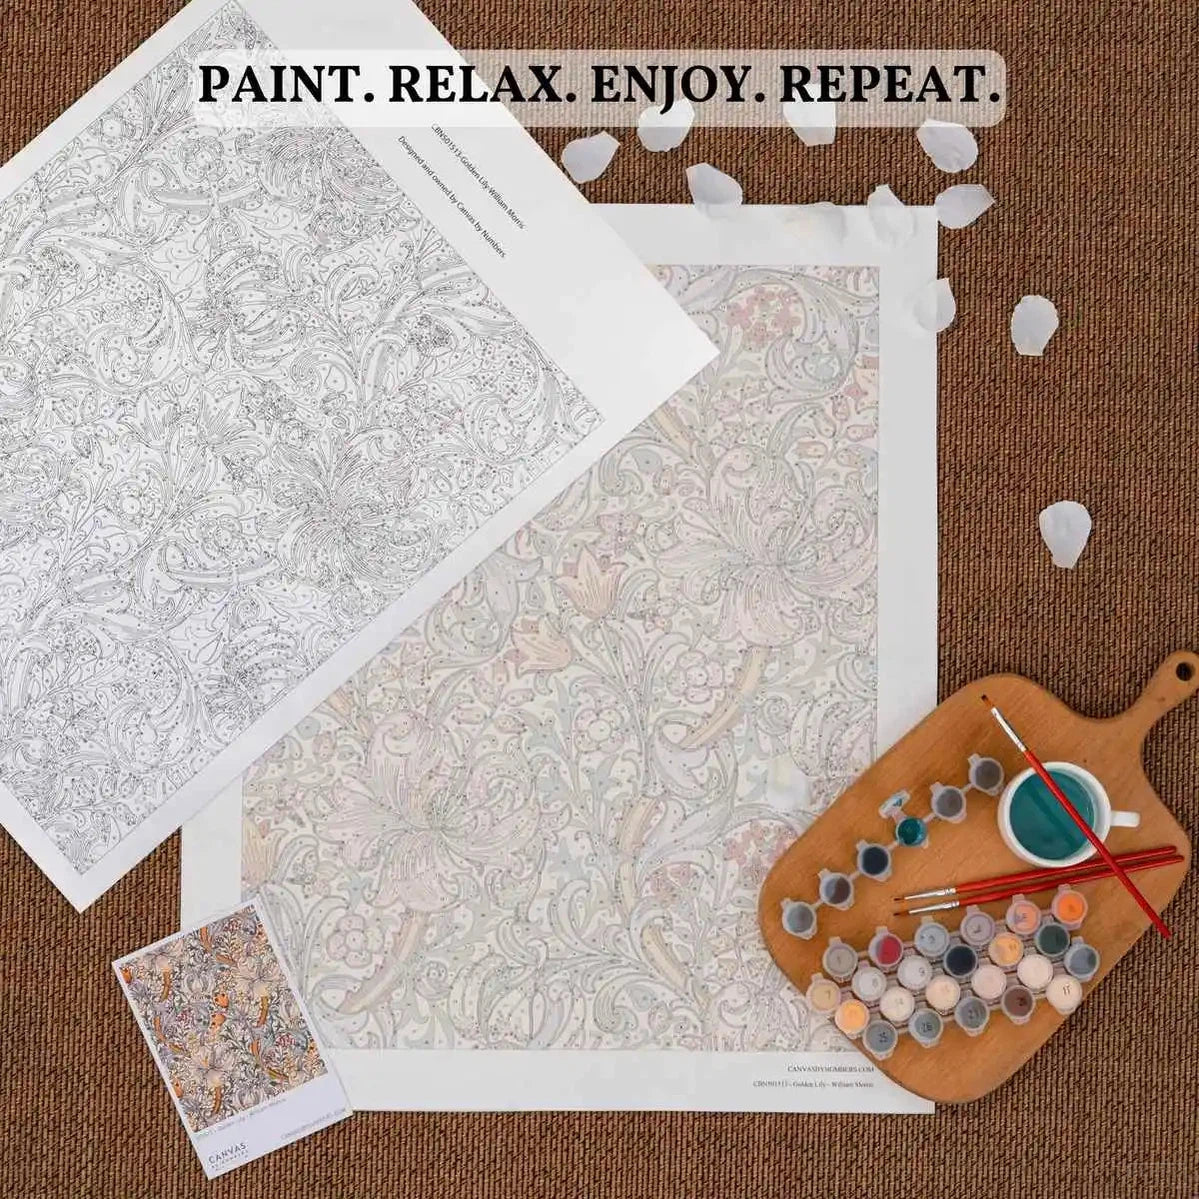 Rose - Paint by Numbers-Colorful red roses intertwined in a truly masterpiece by William Morris. We created this paint by numbers using the best materials for you. Get it today!-Canvas by Numbers